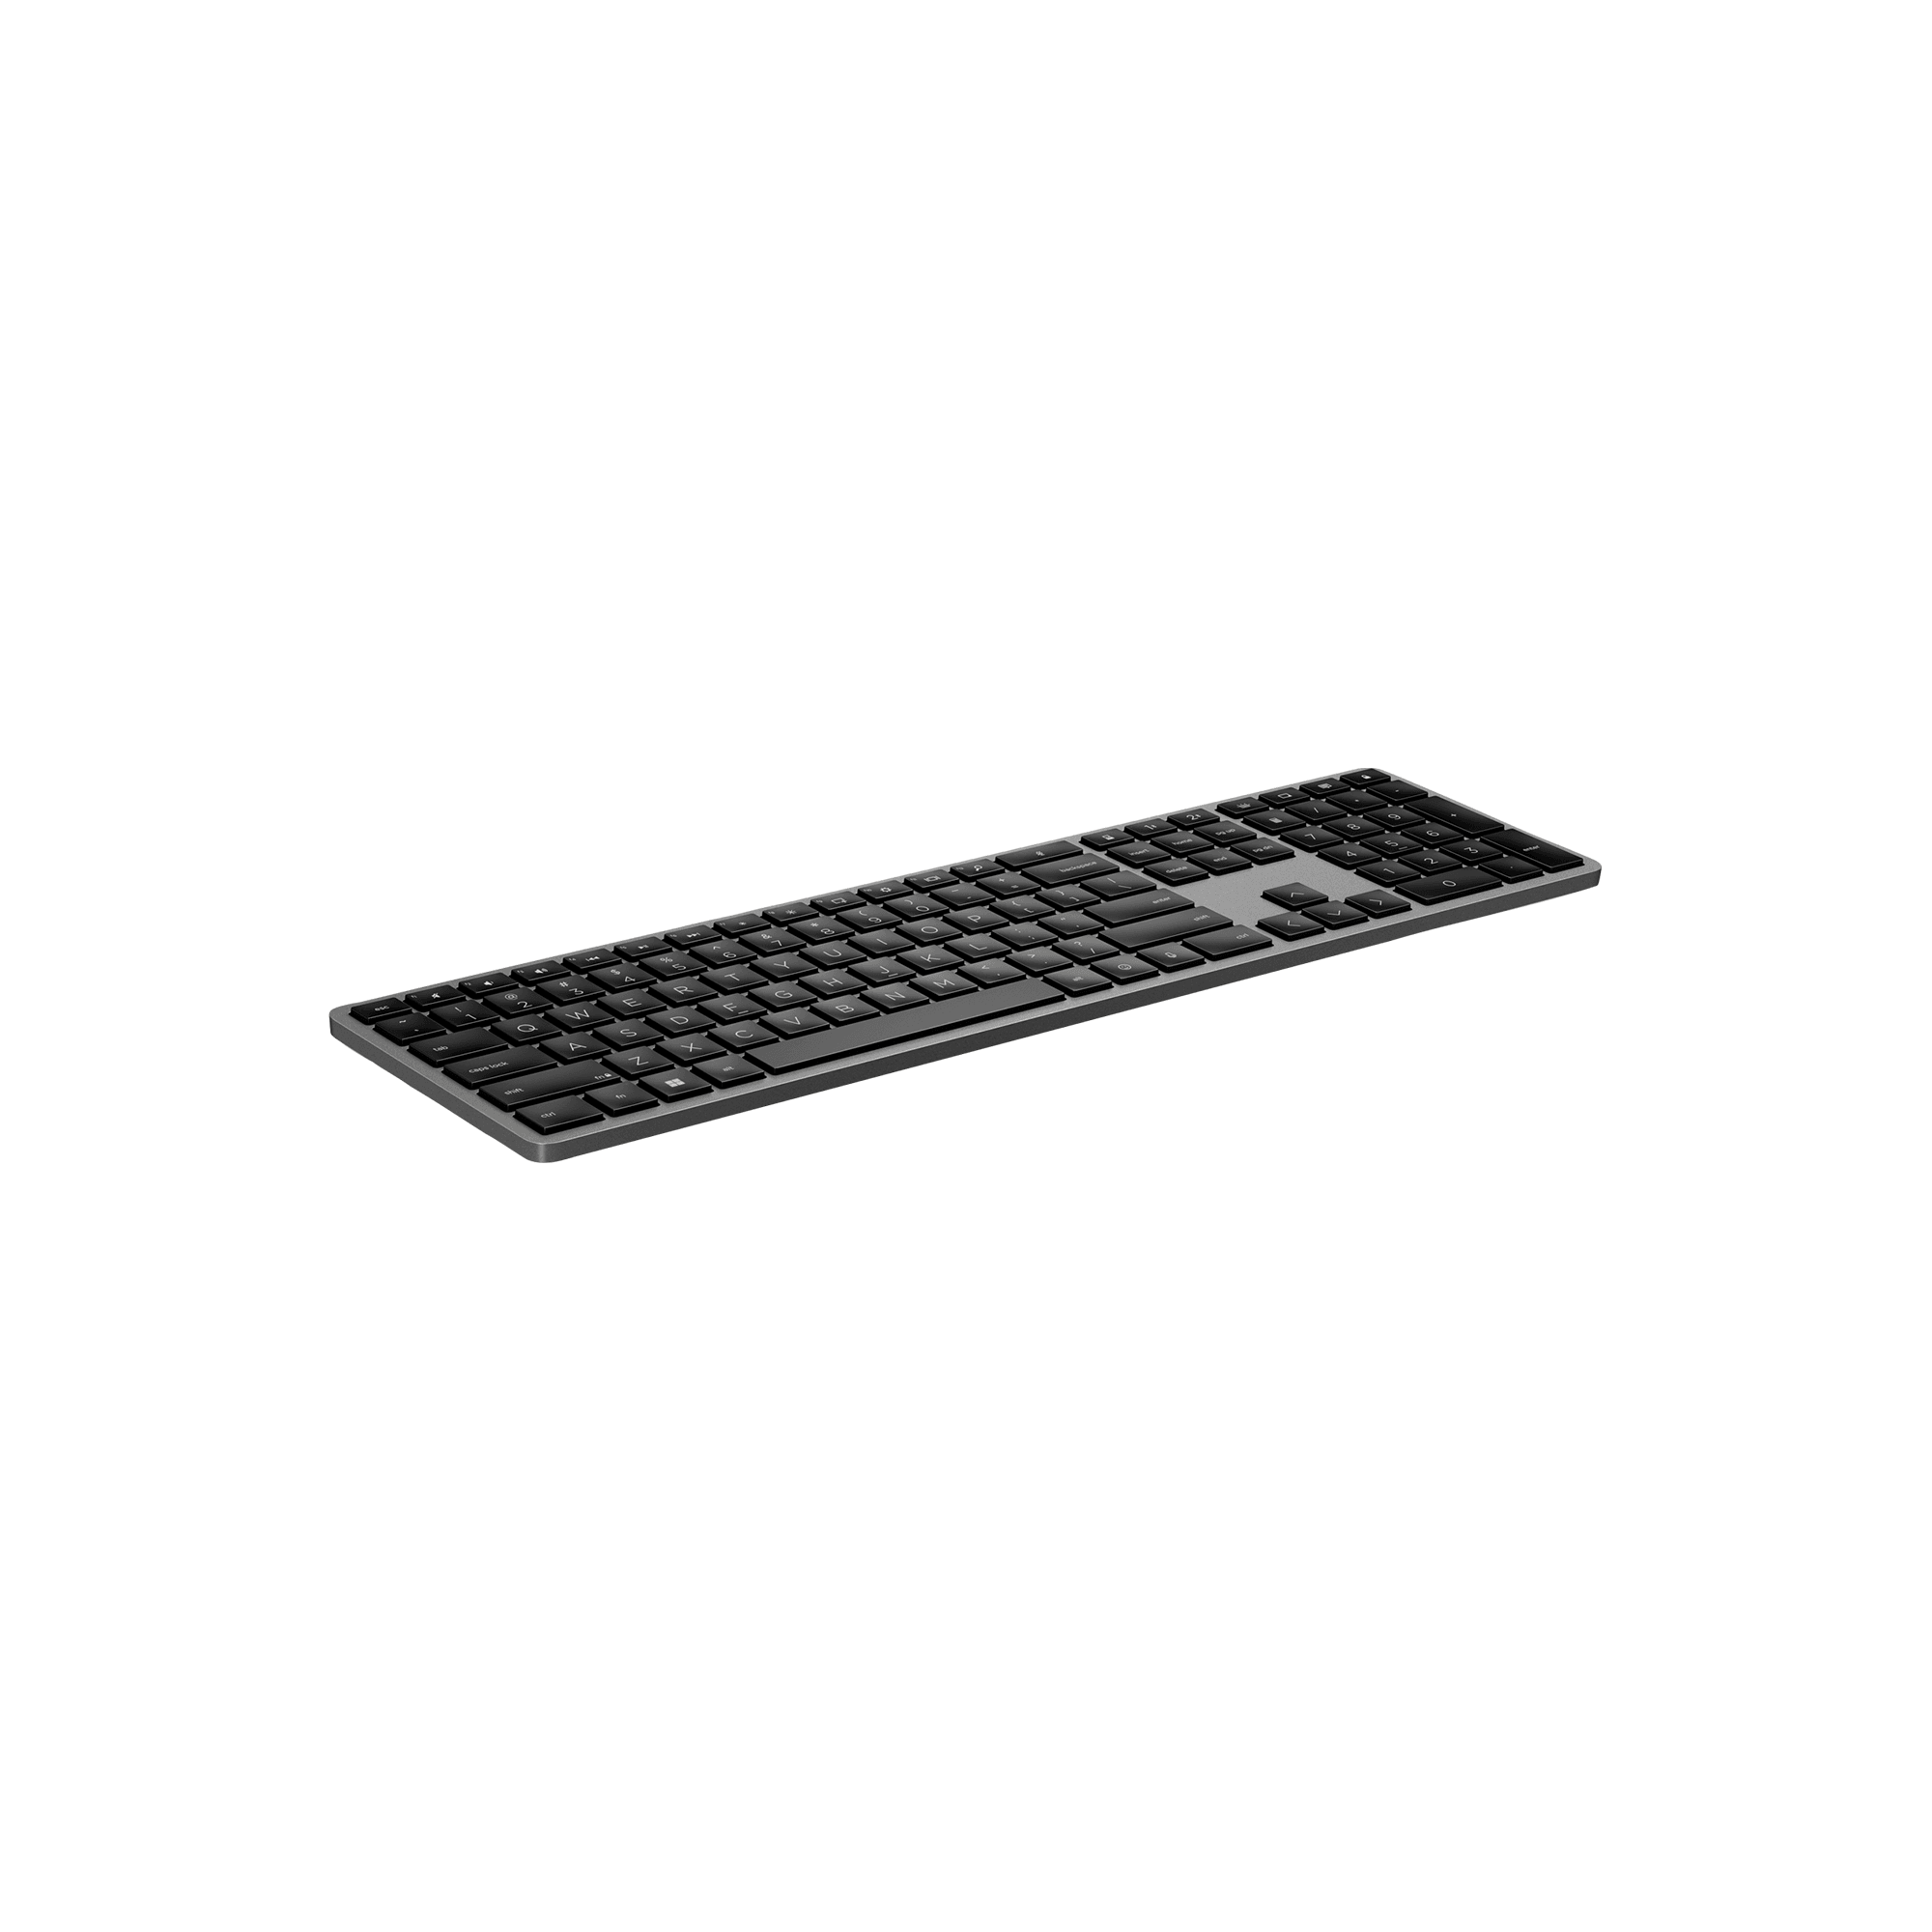 HP 975 Dual-Mode Wireless  For Business Keyboard